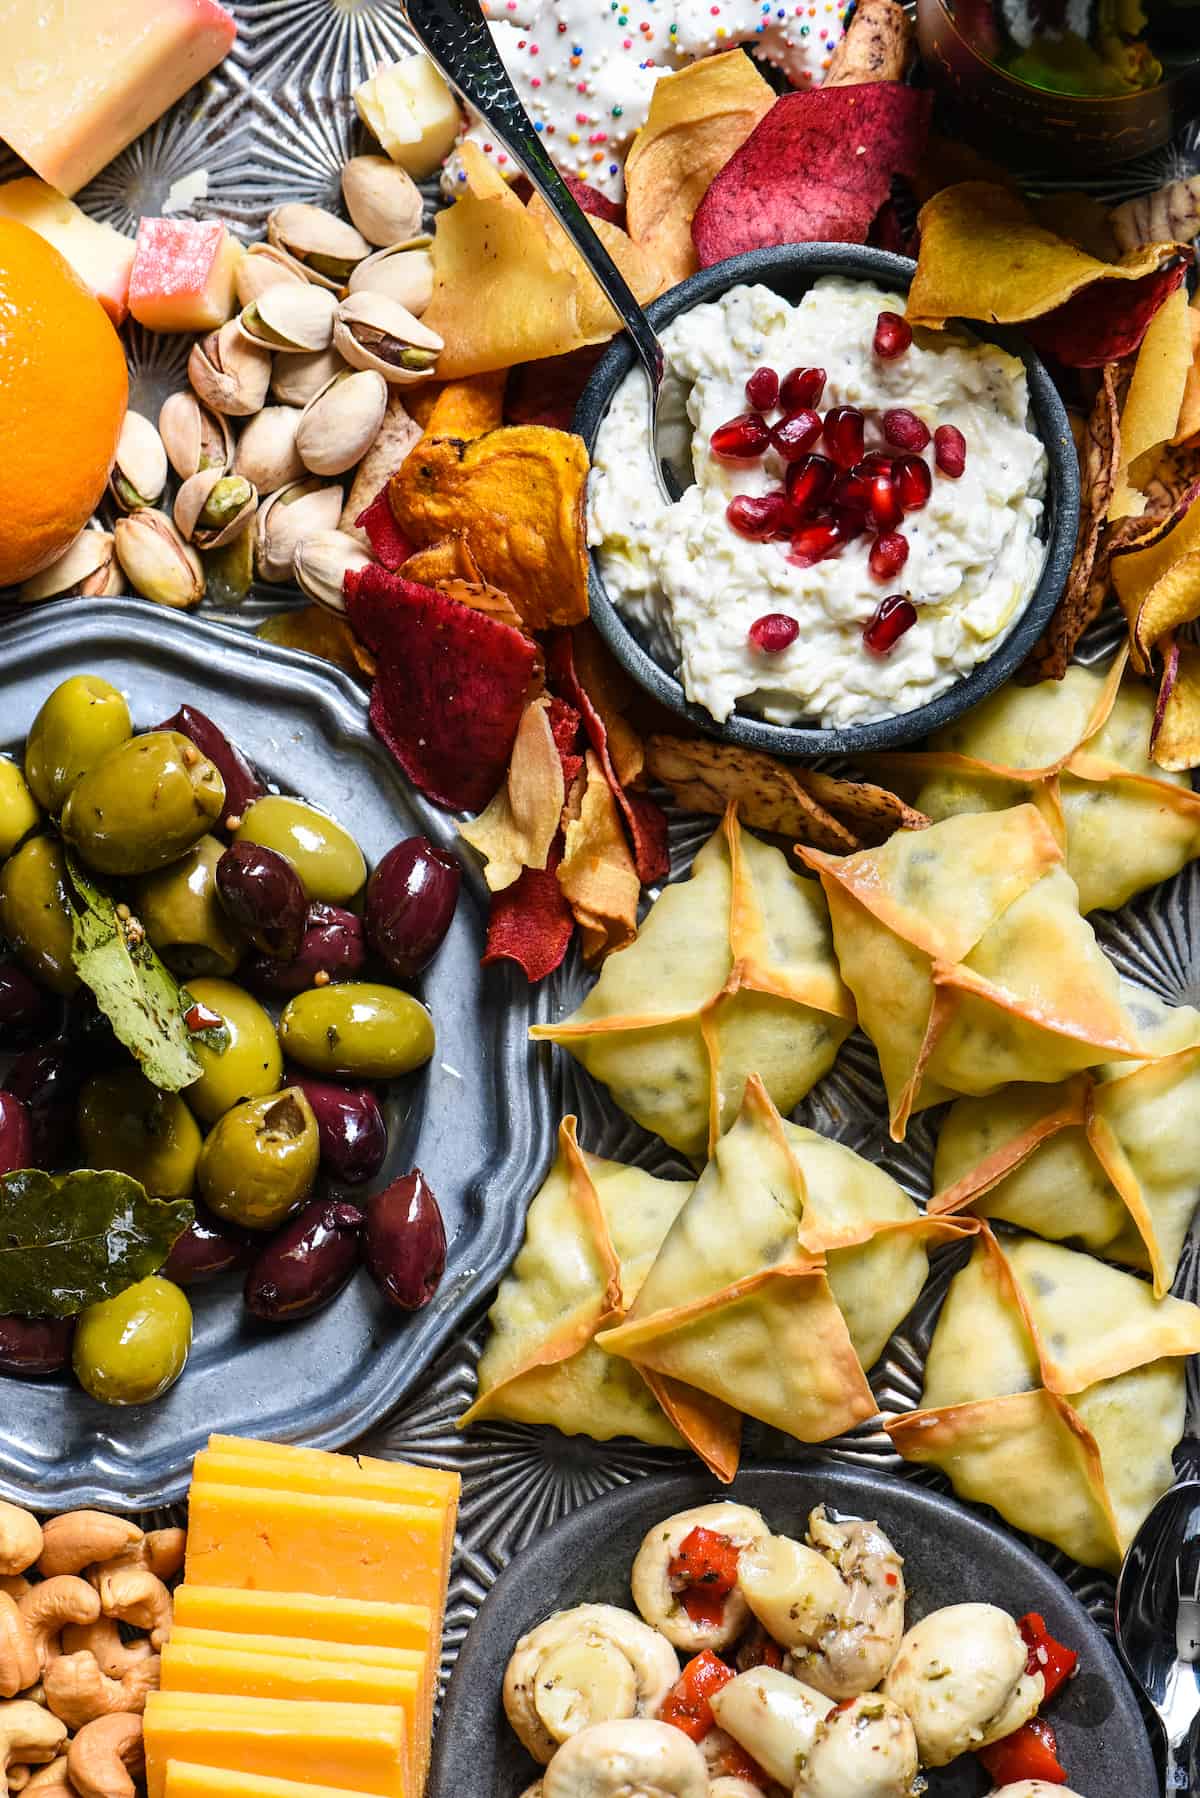 Closeup photo of platter of New Year's Eve food, focusing on wontons, olives and creamy dip.